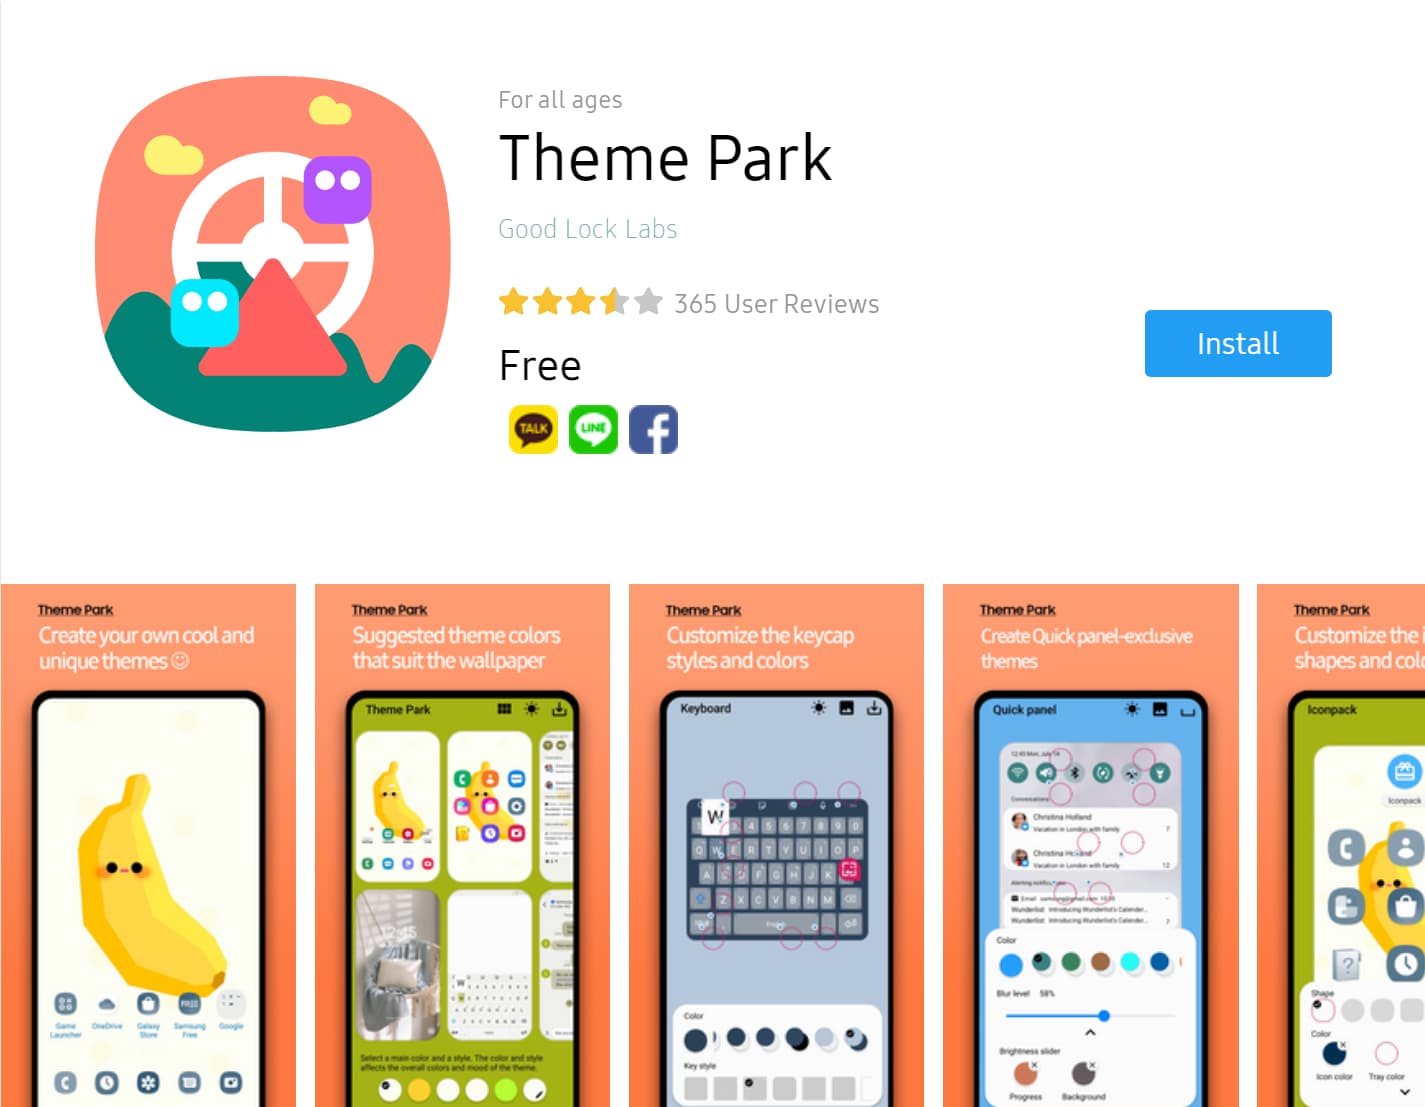 Good Lock Theme Park v1.1 Major Update with Faster Theme Creation [APK Download]